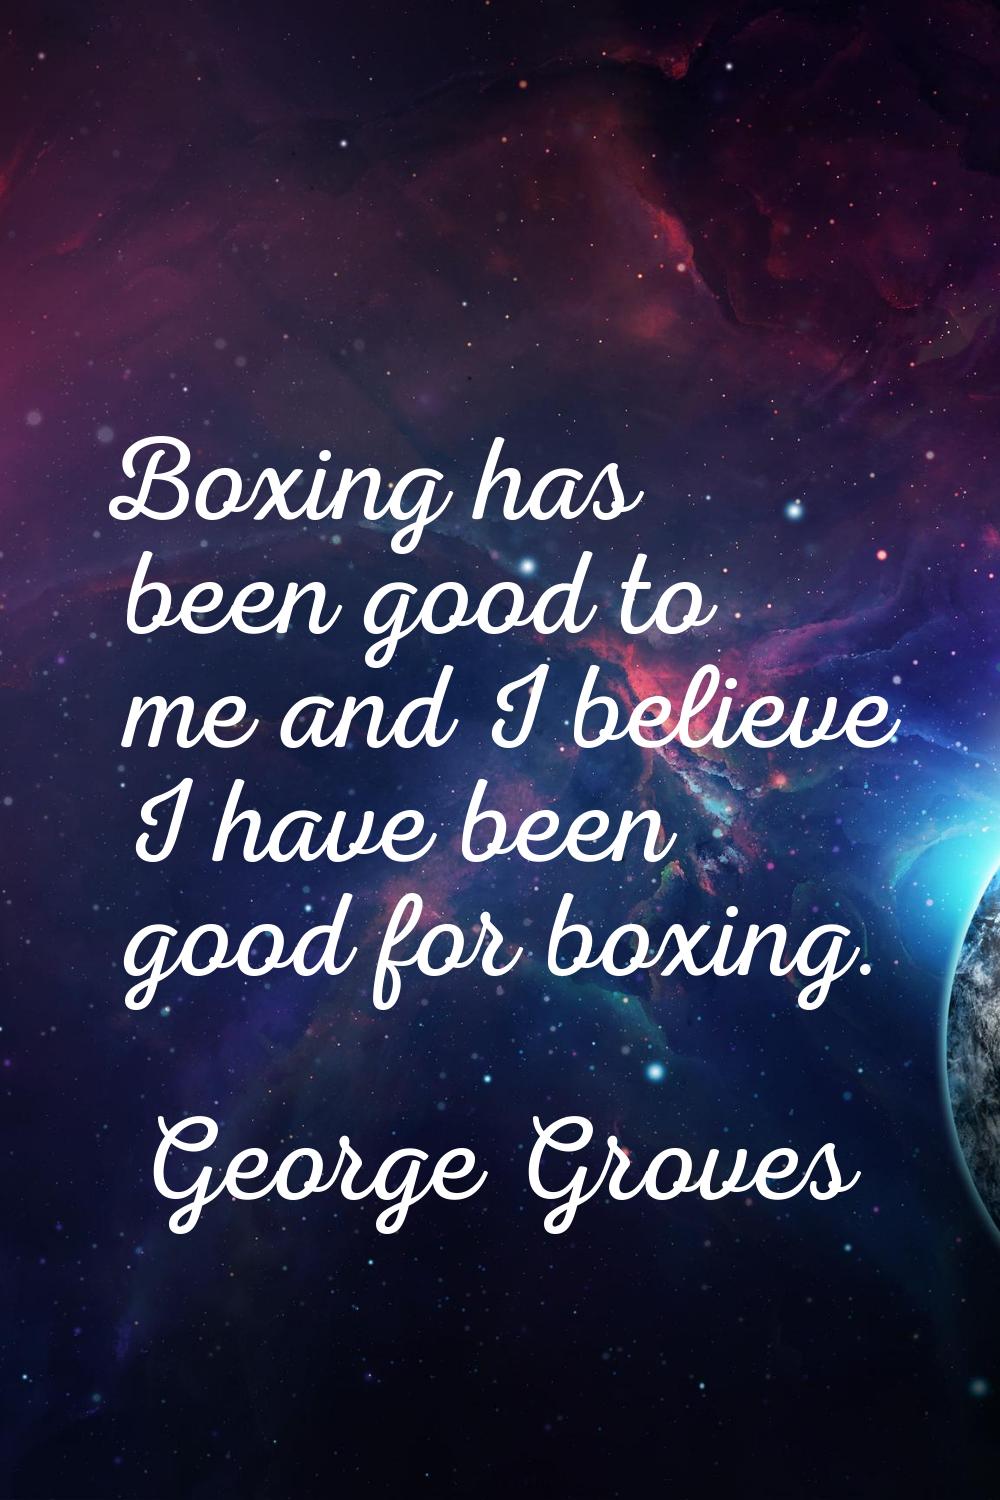 Boxing has been good to me and I believe I have been good for boxing.